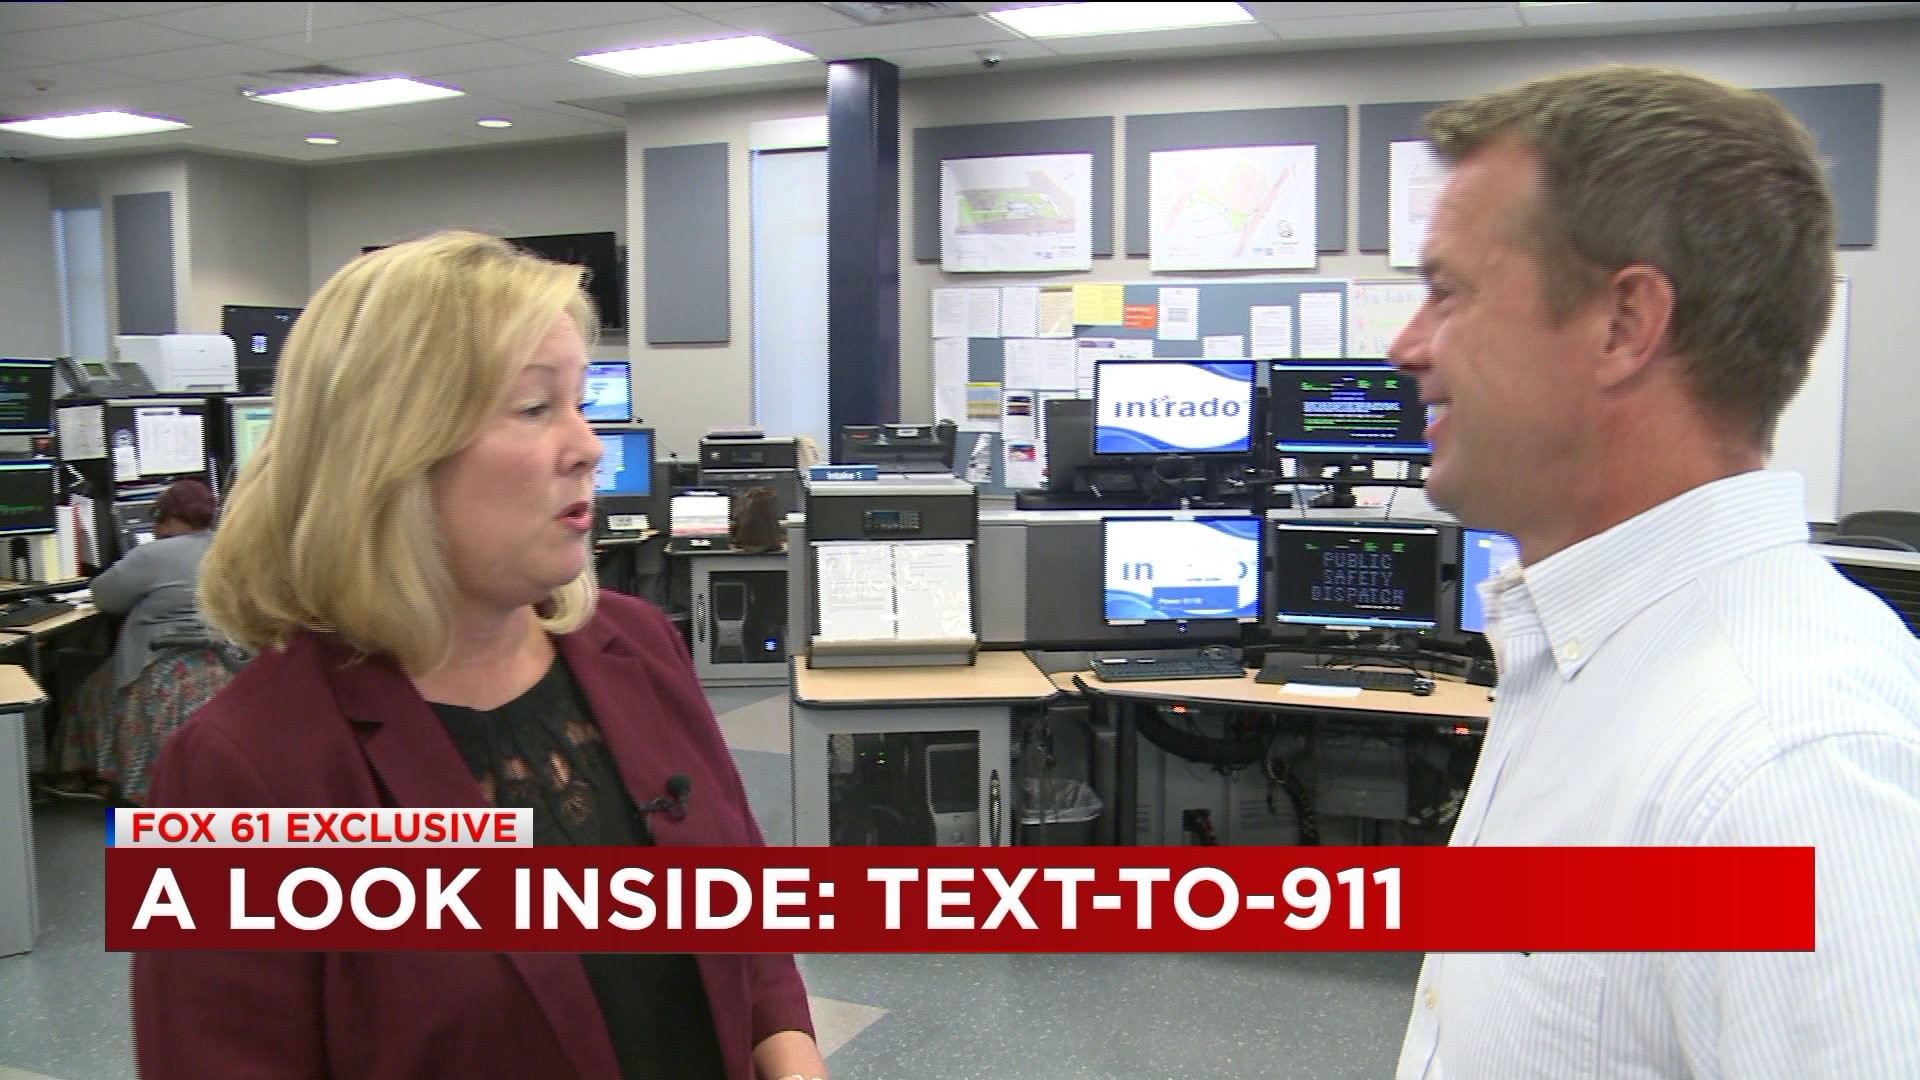 A look inside: Text-to-911